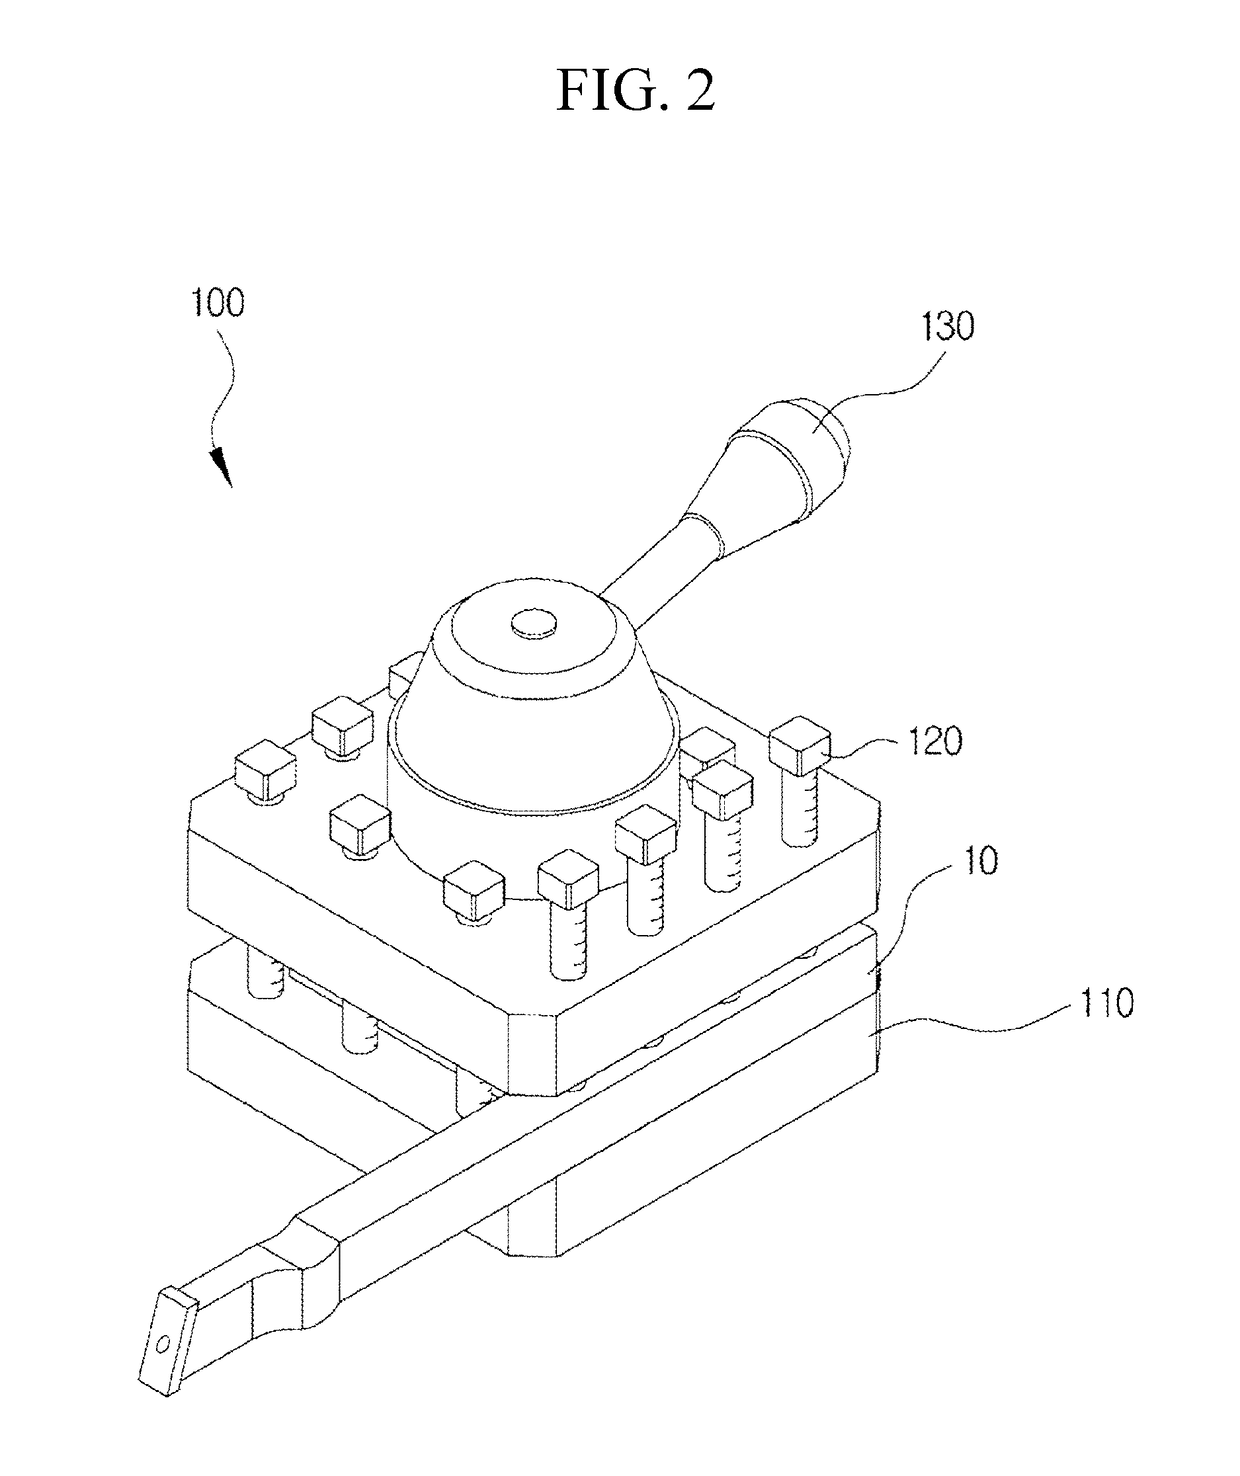 Apparatus and method for attenuation of vibration in machine tool